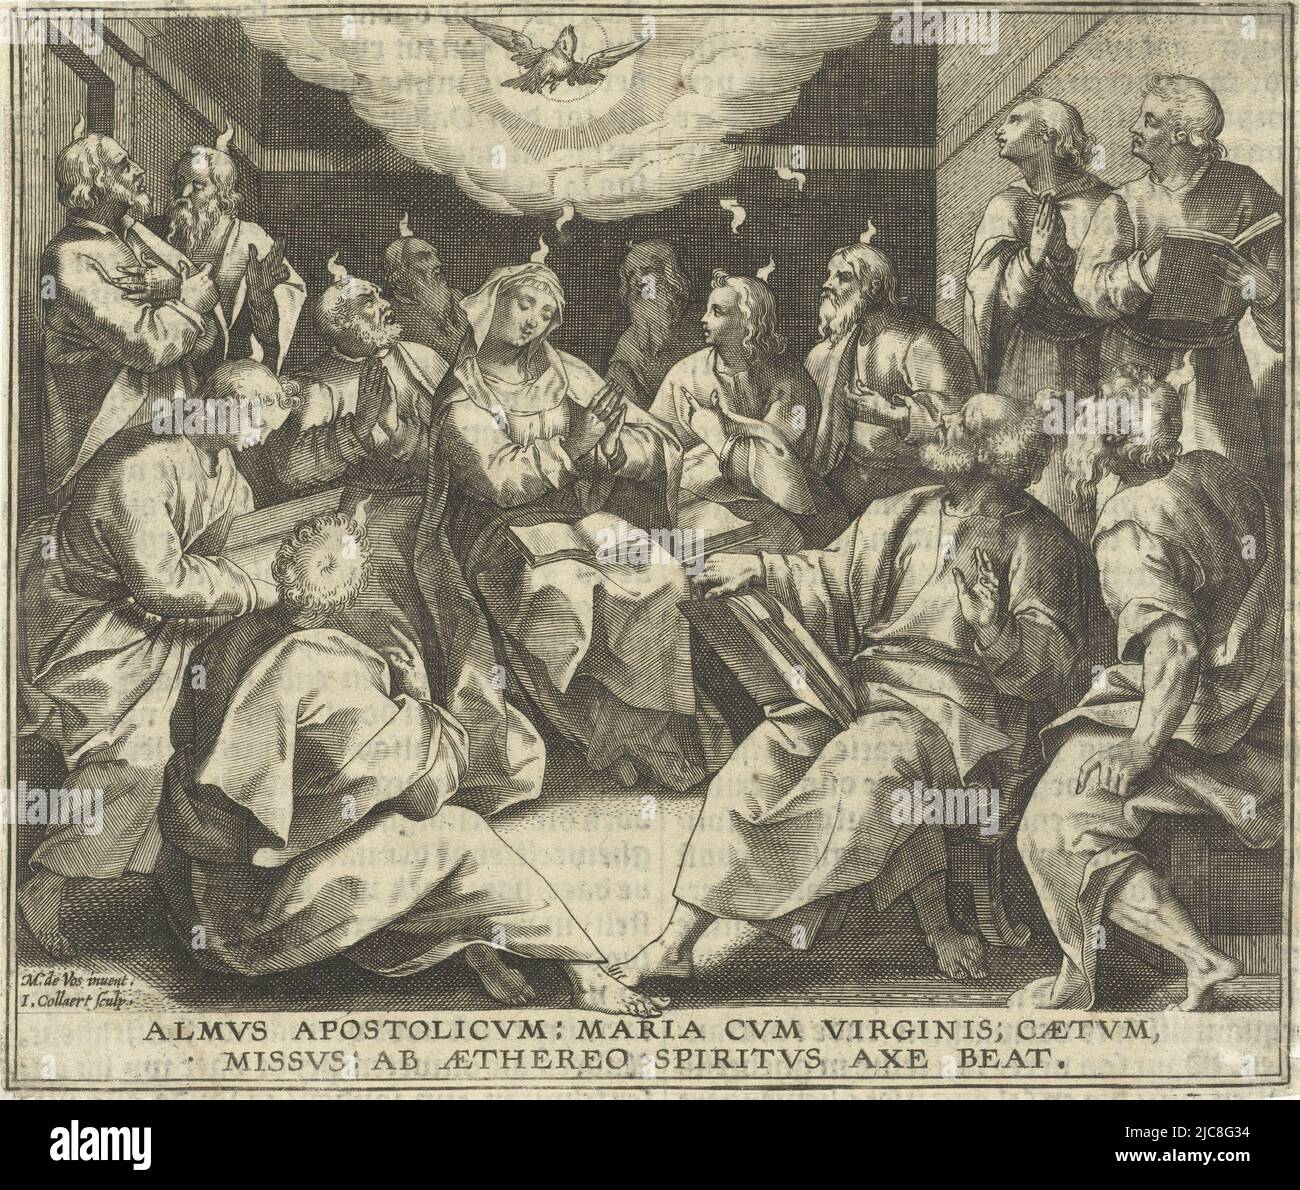 Mary and the disciples of Christ sit in a room praying. In the midst of the group, the dove of the Holy Spirit appears. Above the heads of the apostles and Mary, fiery tongues burn, signs of the outpouring of the Holy Spirit into their hearts. The print has a Latin caption, Outpouring of the Holy Spirit., print maker: Jan Collaert (II), (mentioned on object), Maerten de Vos, (mentioned on object), publisher: Hieronymus Verdussen, (attributed to), Antwerp, 1597, paper, engraving, h 125 mm × w 148 mm Stock Photo